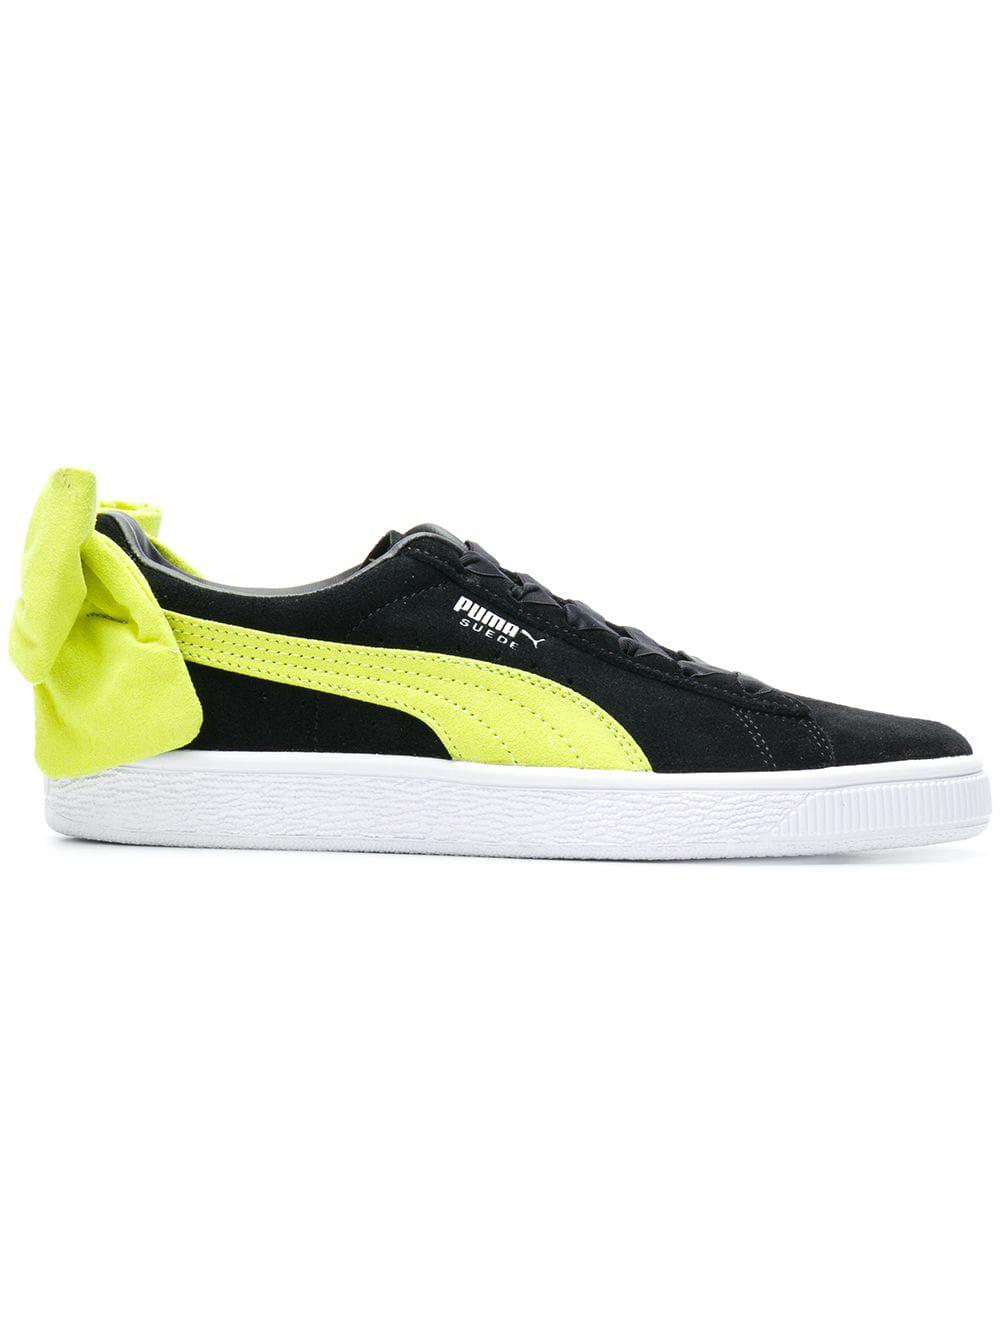 PUMA Bow Back Sneakers in Black | Lyst